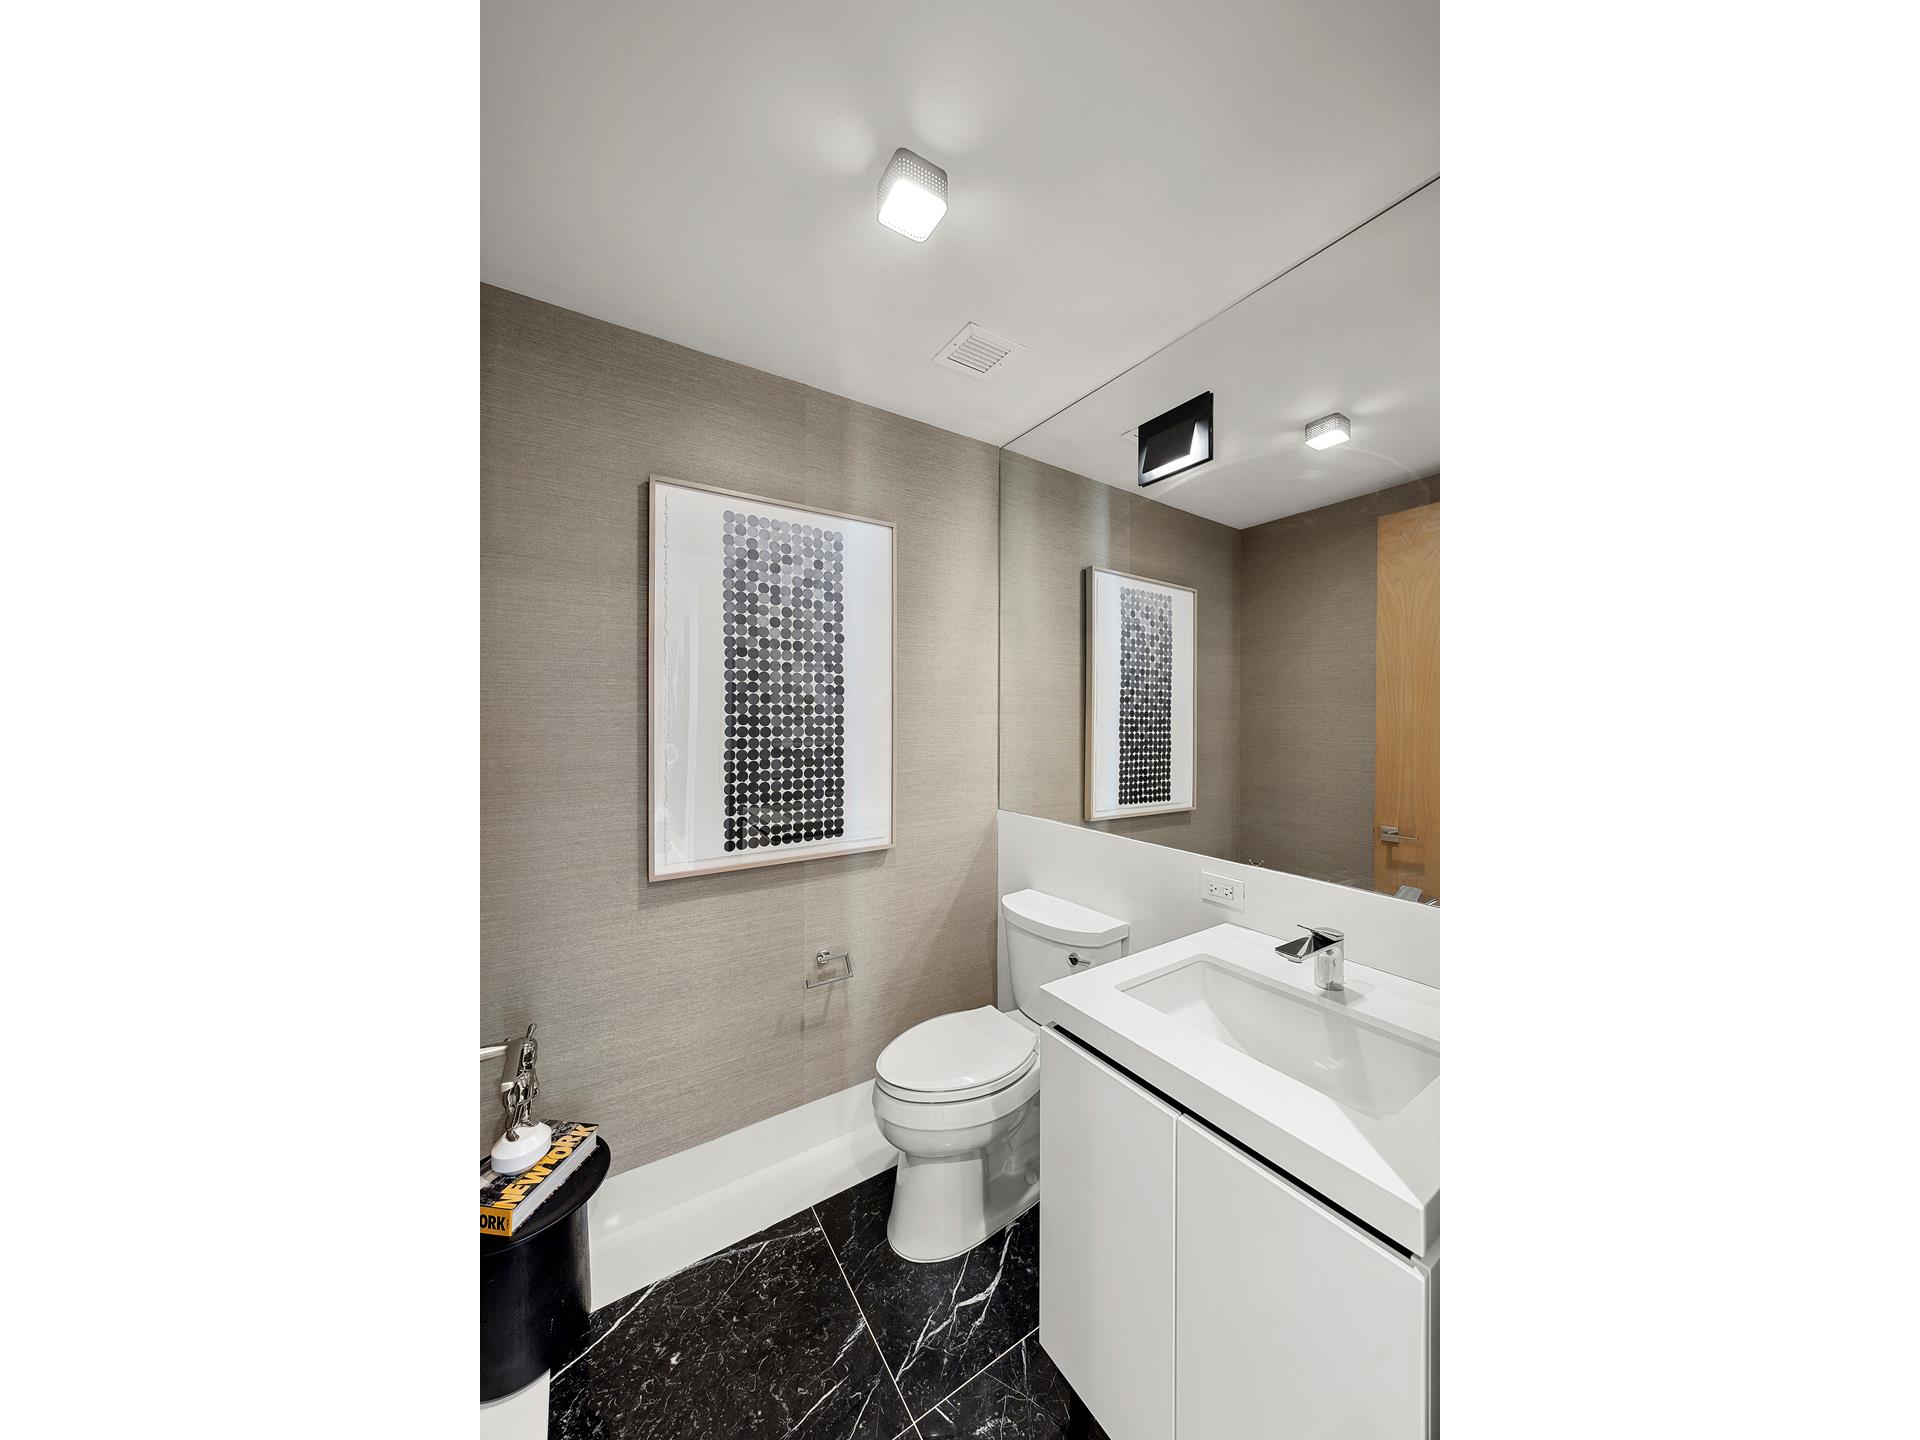 200 East 21st Street 9D, Gramercy Park, Downtown, NYC - 2 Bedrooms  
2.5 Bathrooms  
4 Rooms - 